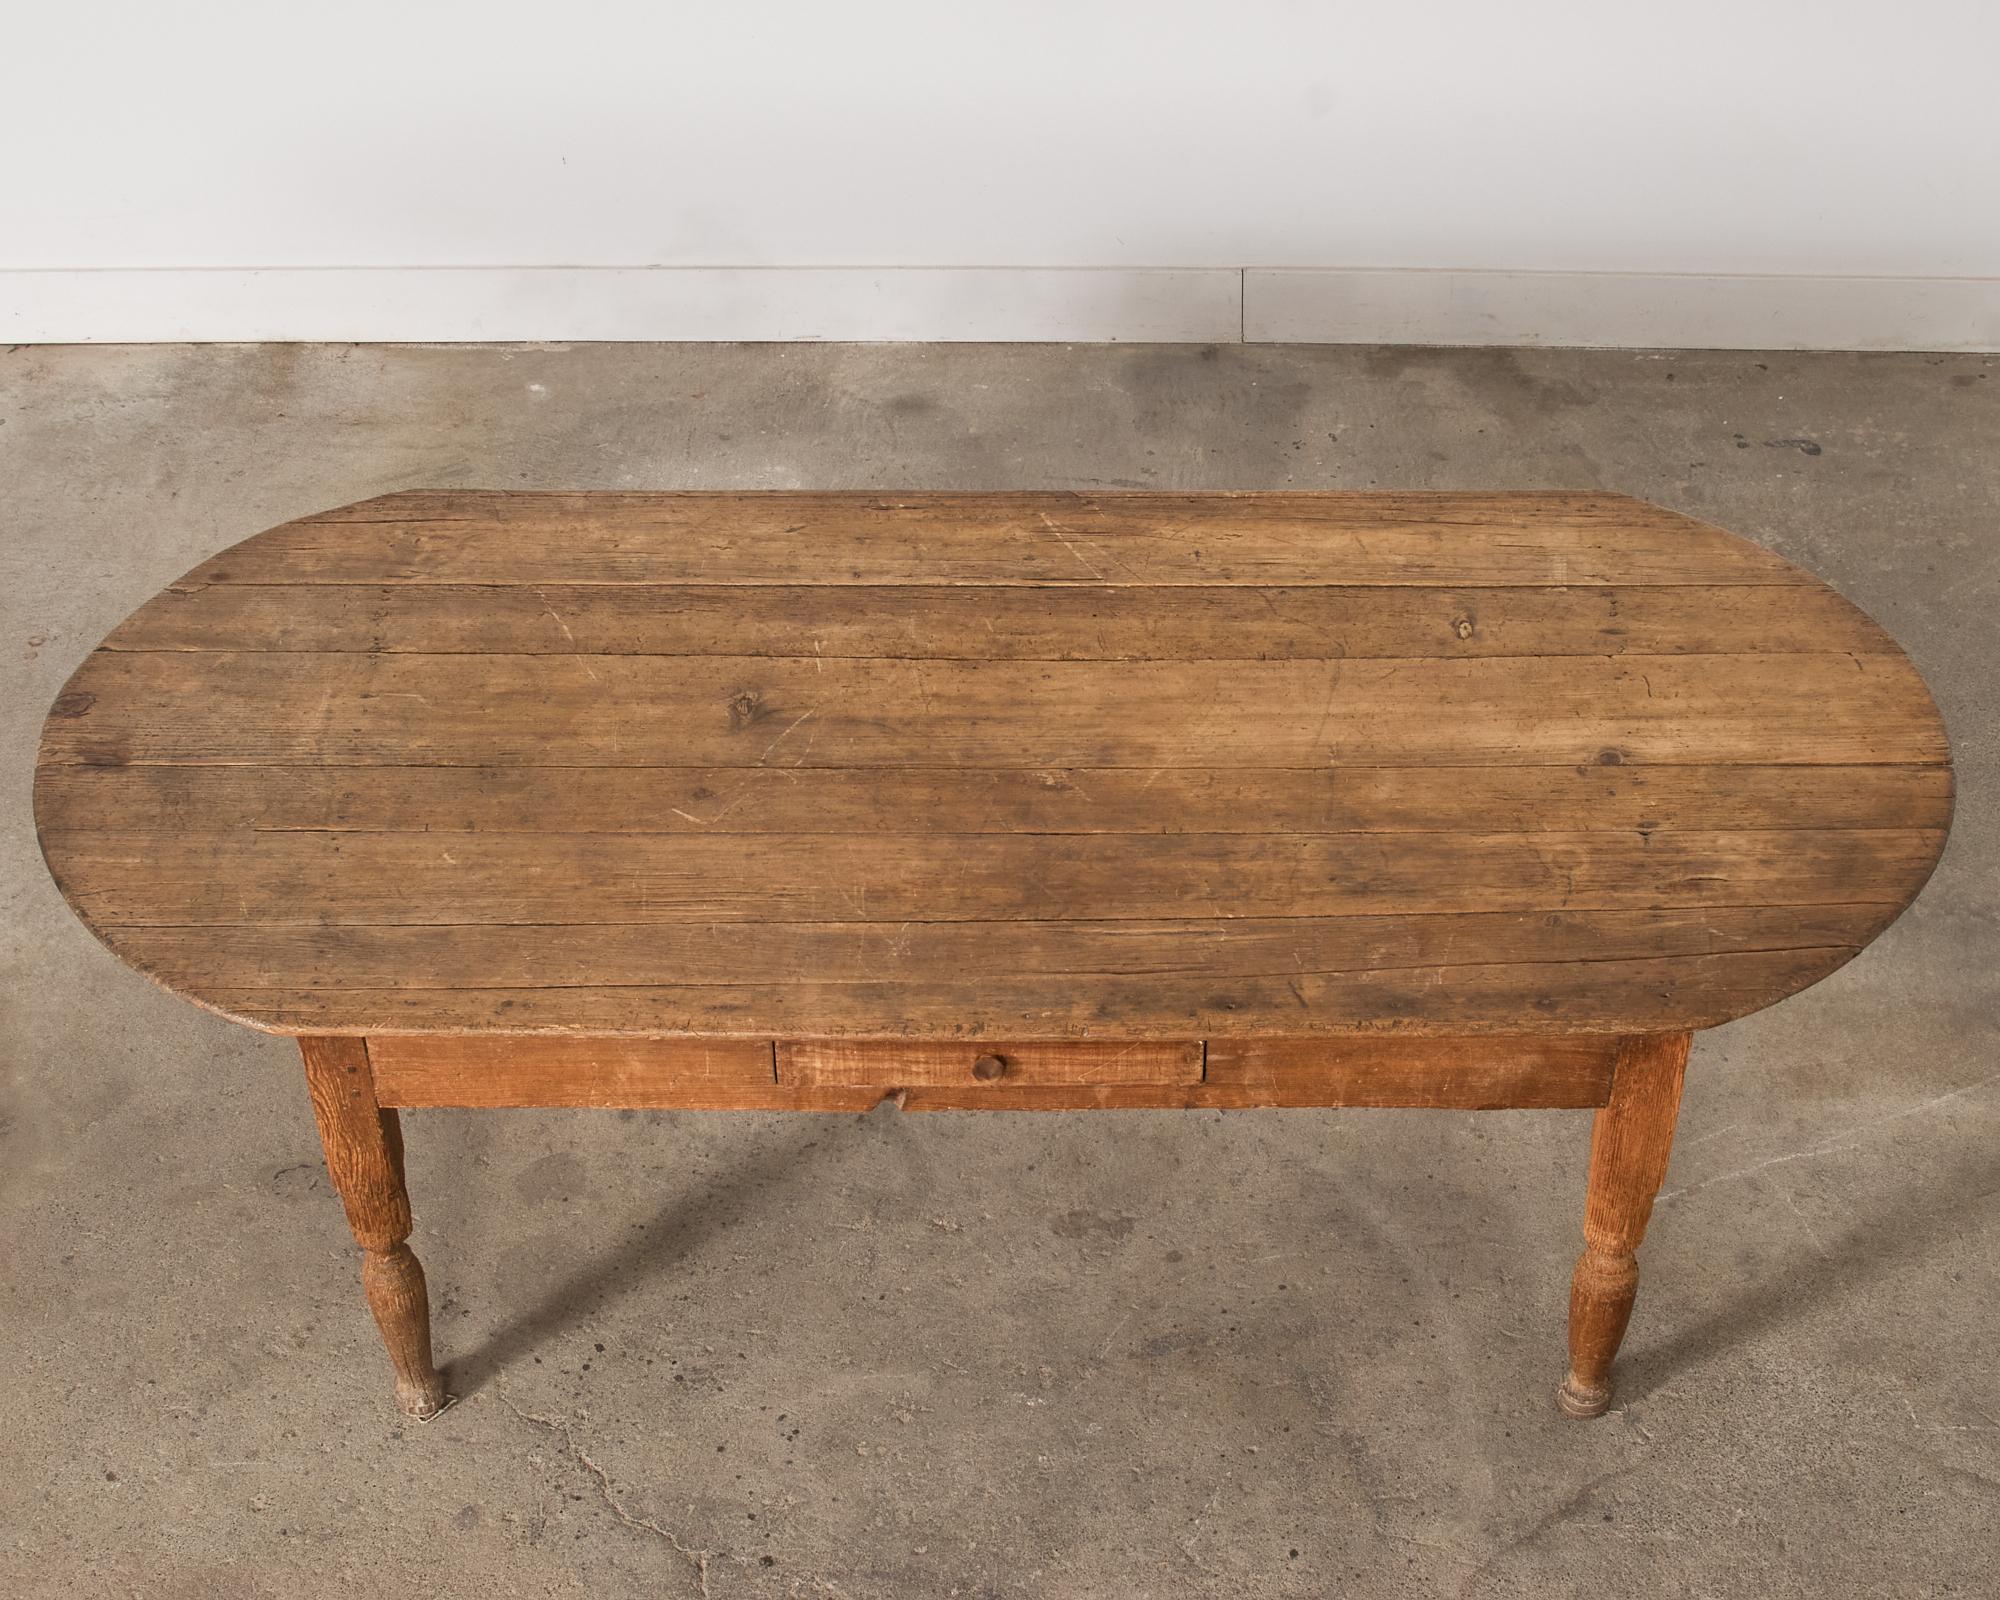 Country English Provincial Oval Pine Farmhouse Dining Table  In Distressed Condition For Sale In Rio Vista, CA